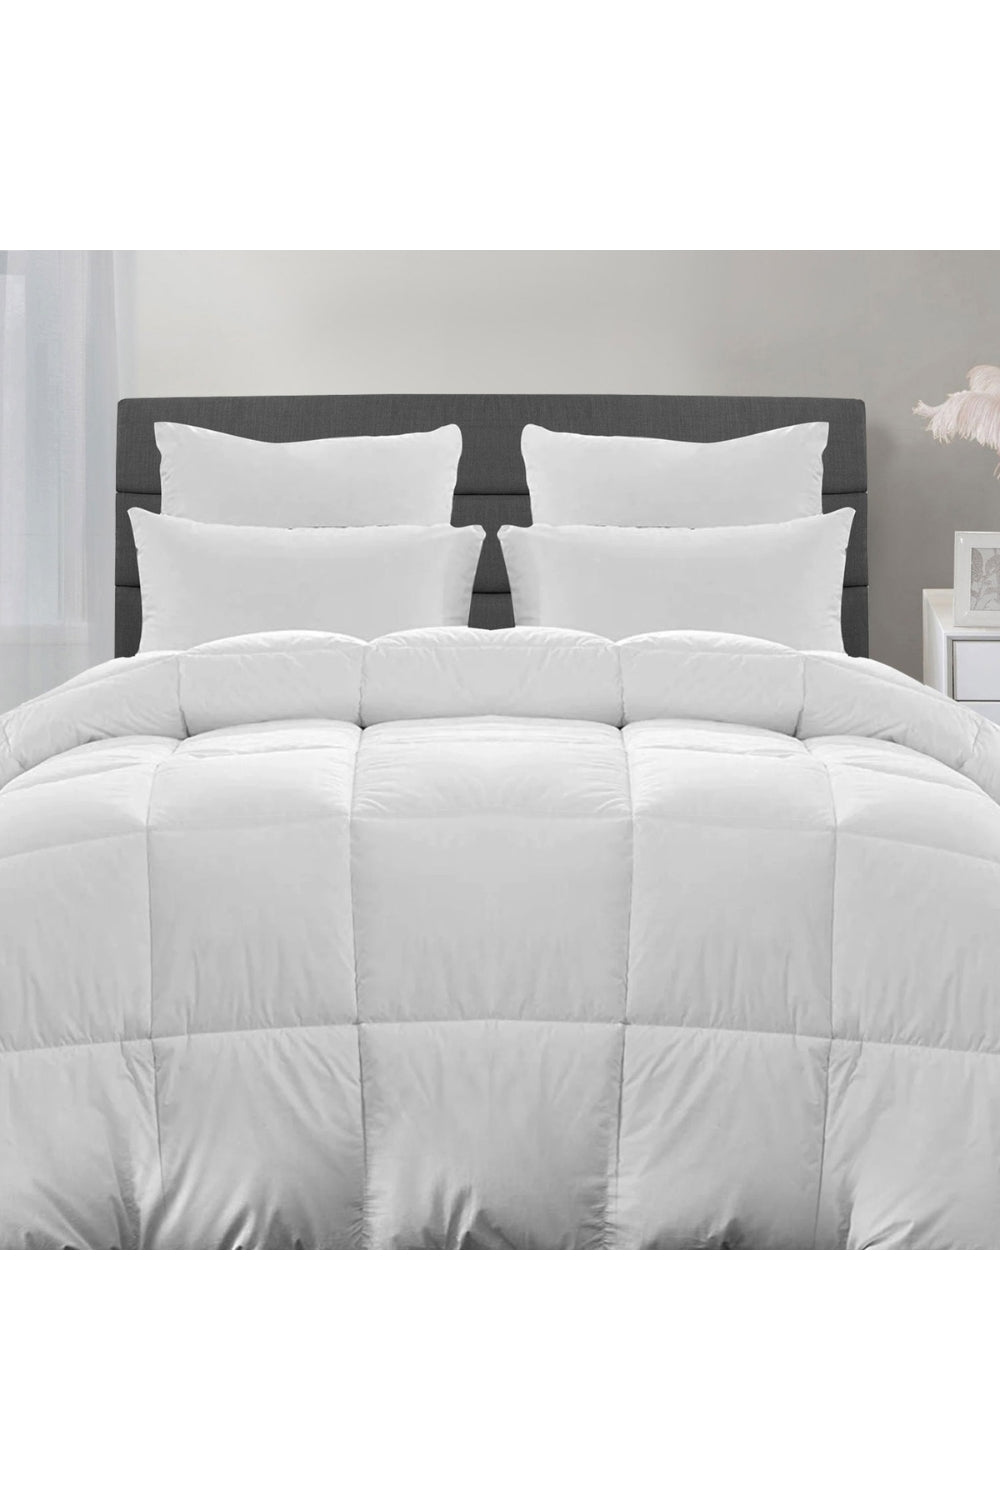 The Home Collection Duck Feather and Down Duvet 1 Shaws Department Stores